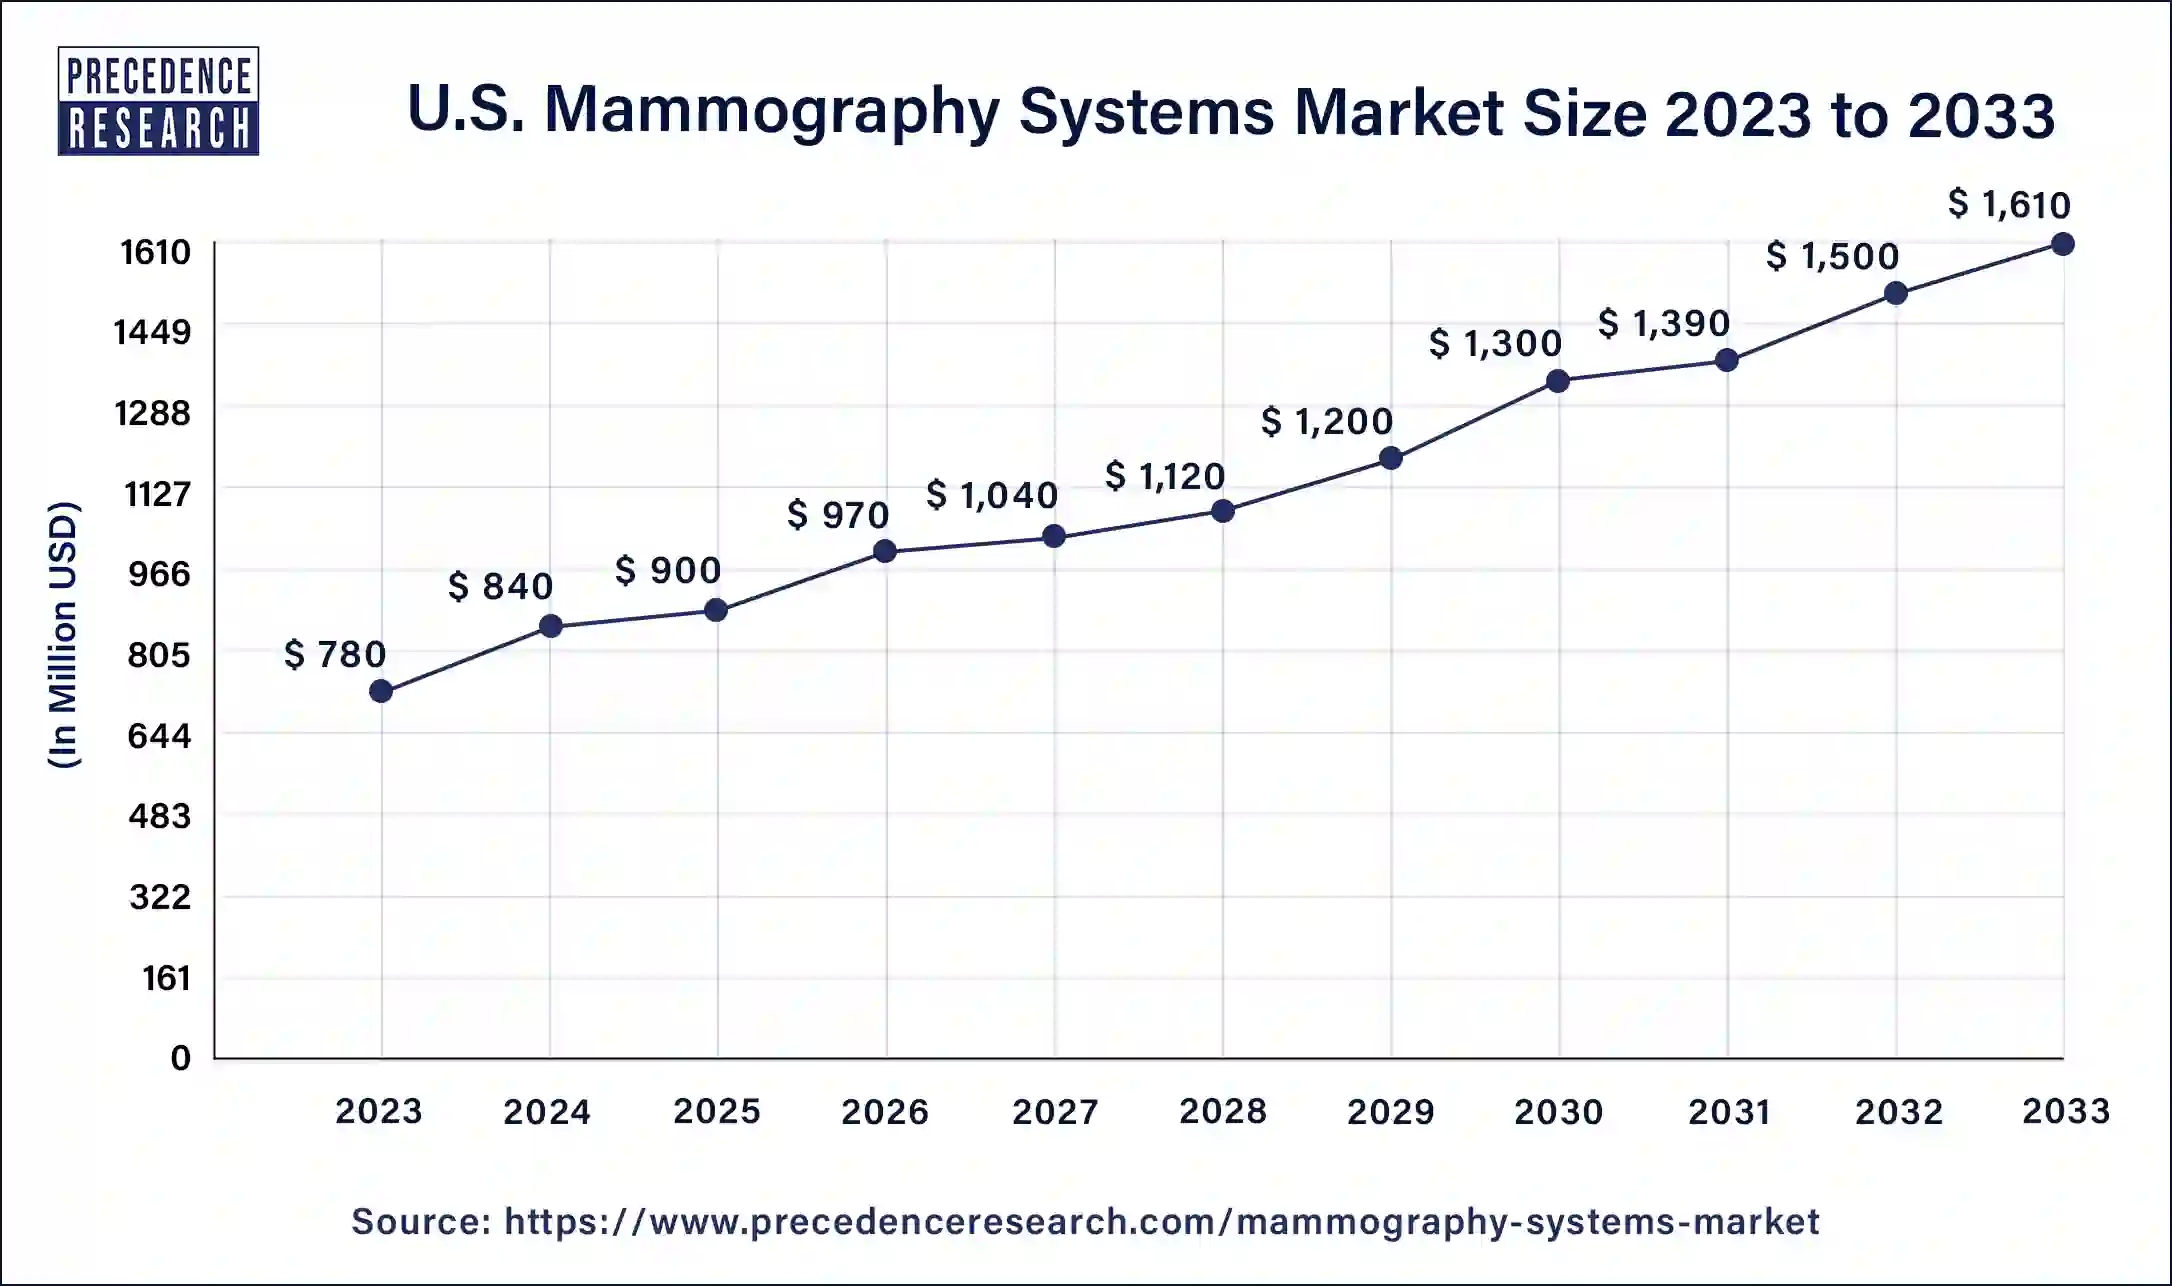 U.S. Mammography Systems Market Size 2024 to 2033